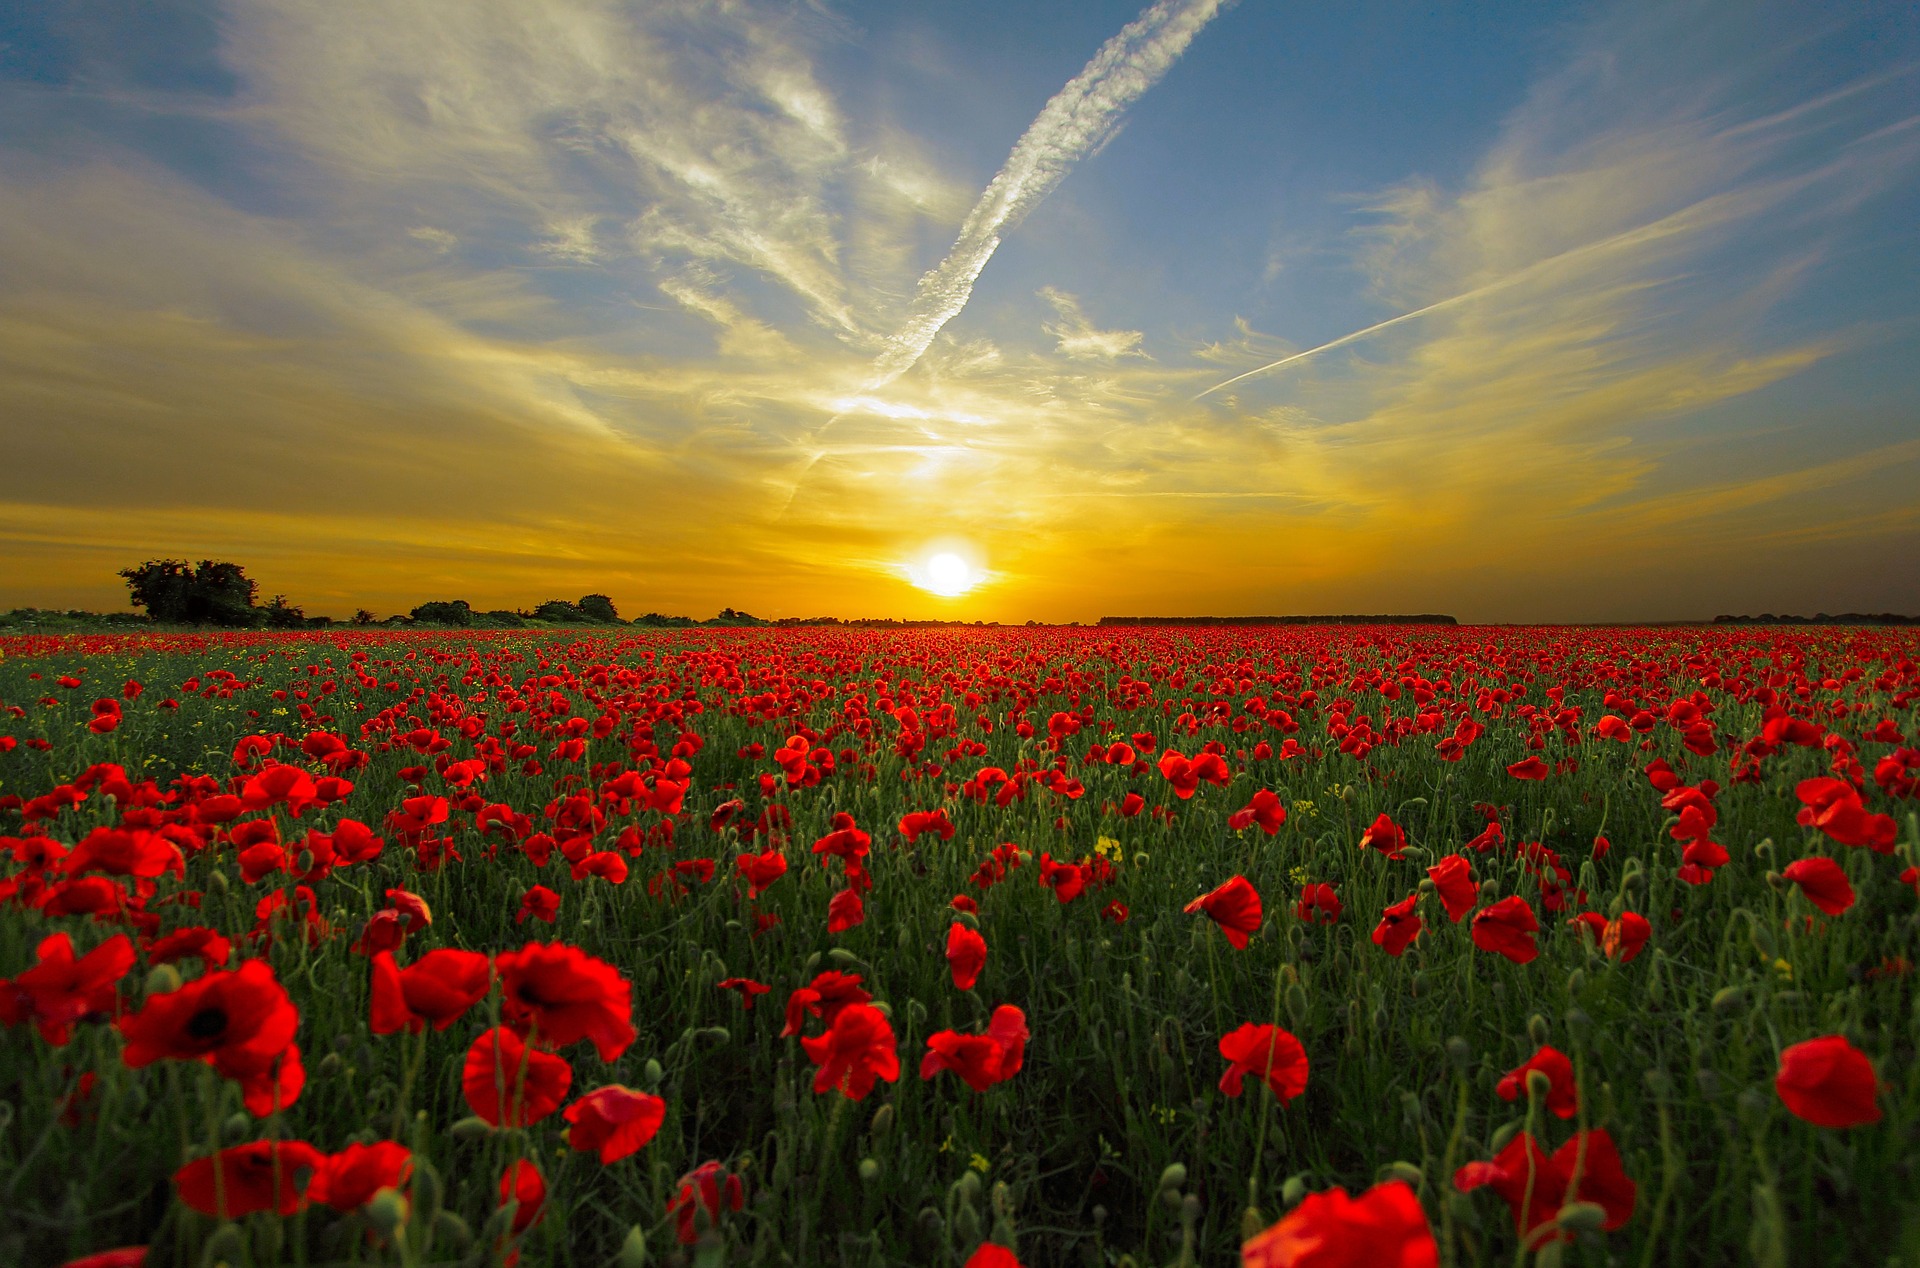 Sun setting over field of poppies